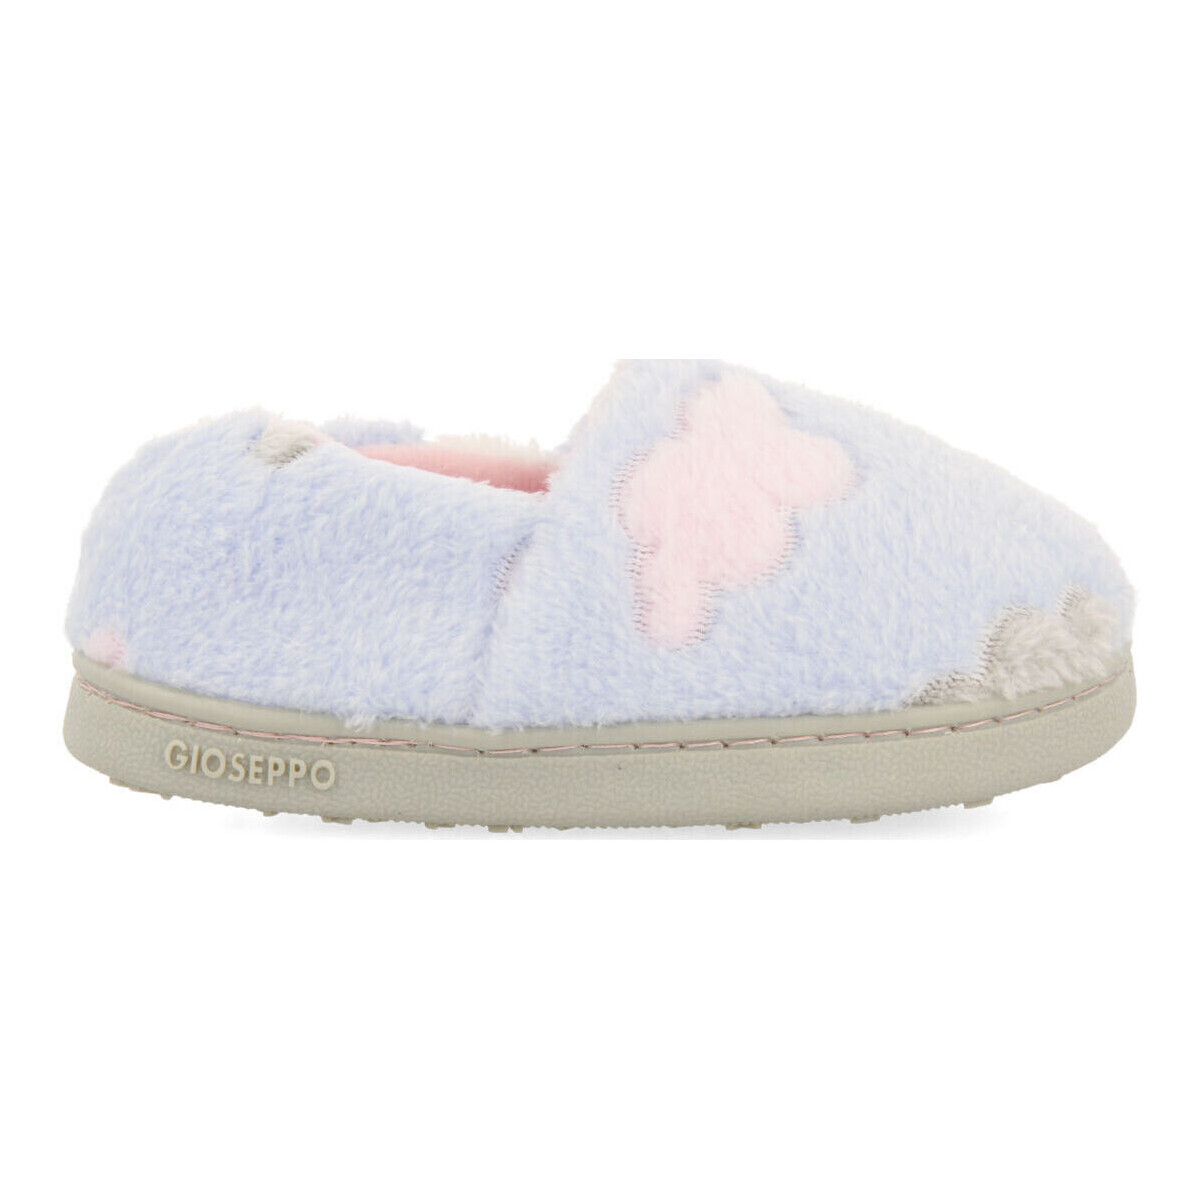 Chaussures Fille Chaussons Gioseppo kitimat Bleu